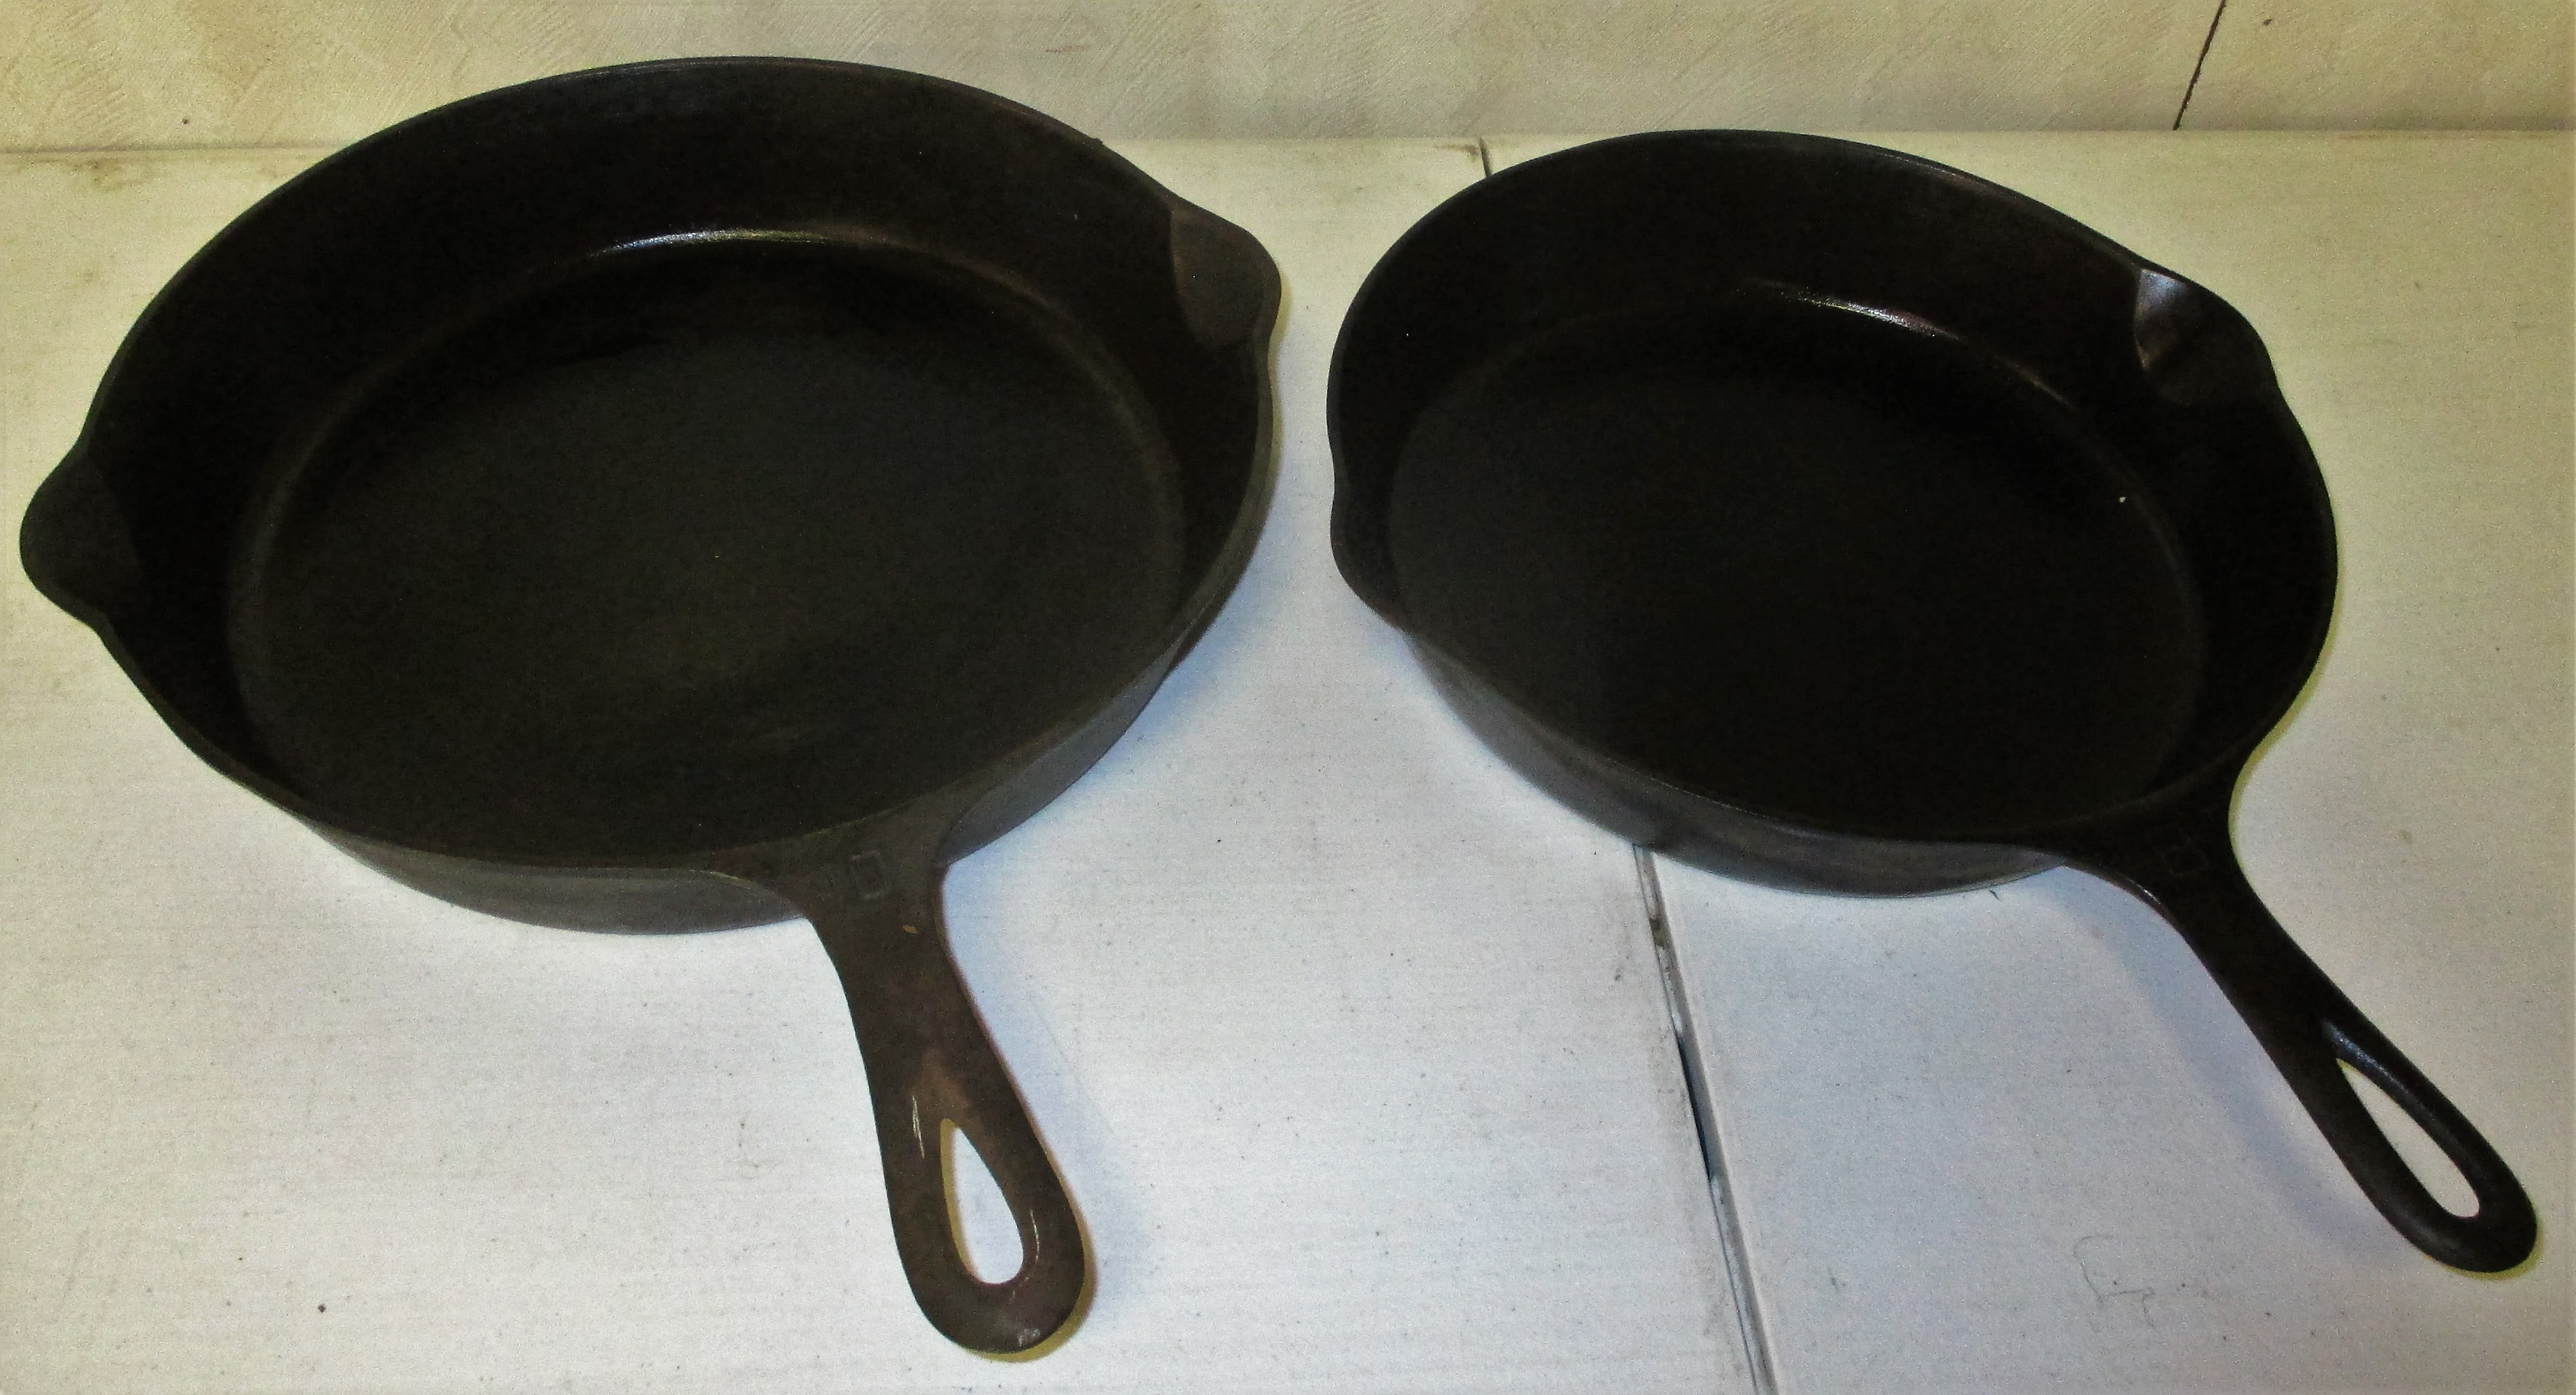 94: #9 And #10 Griswold Skillets